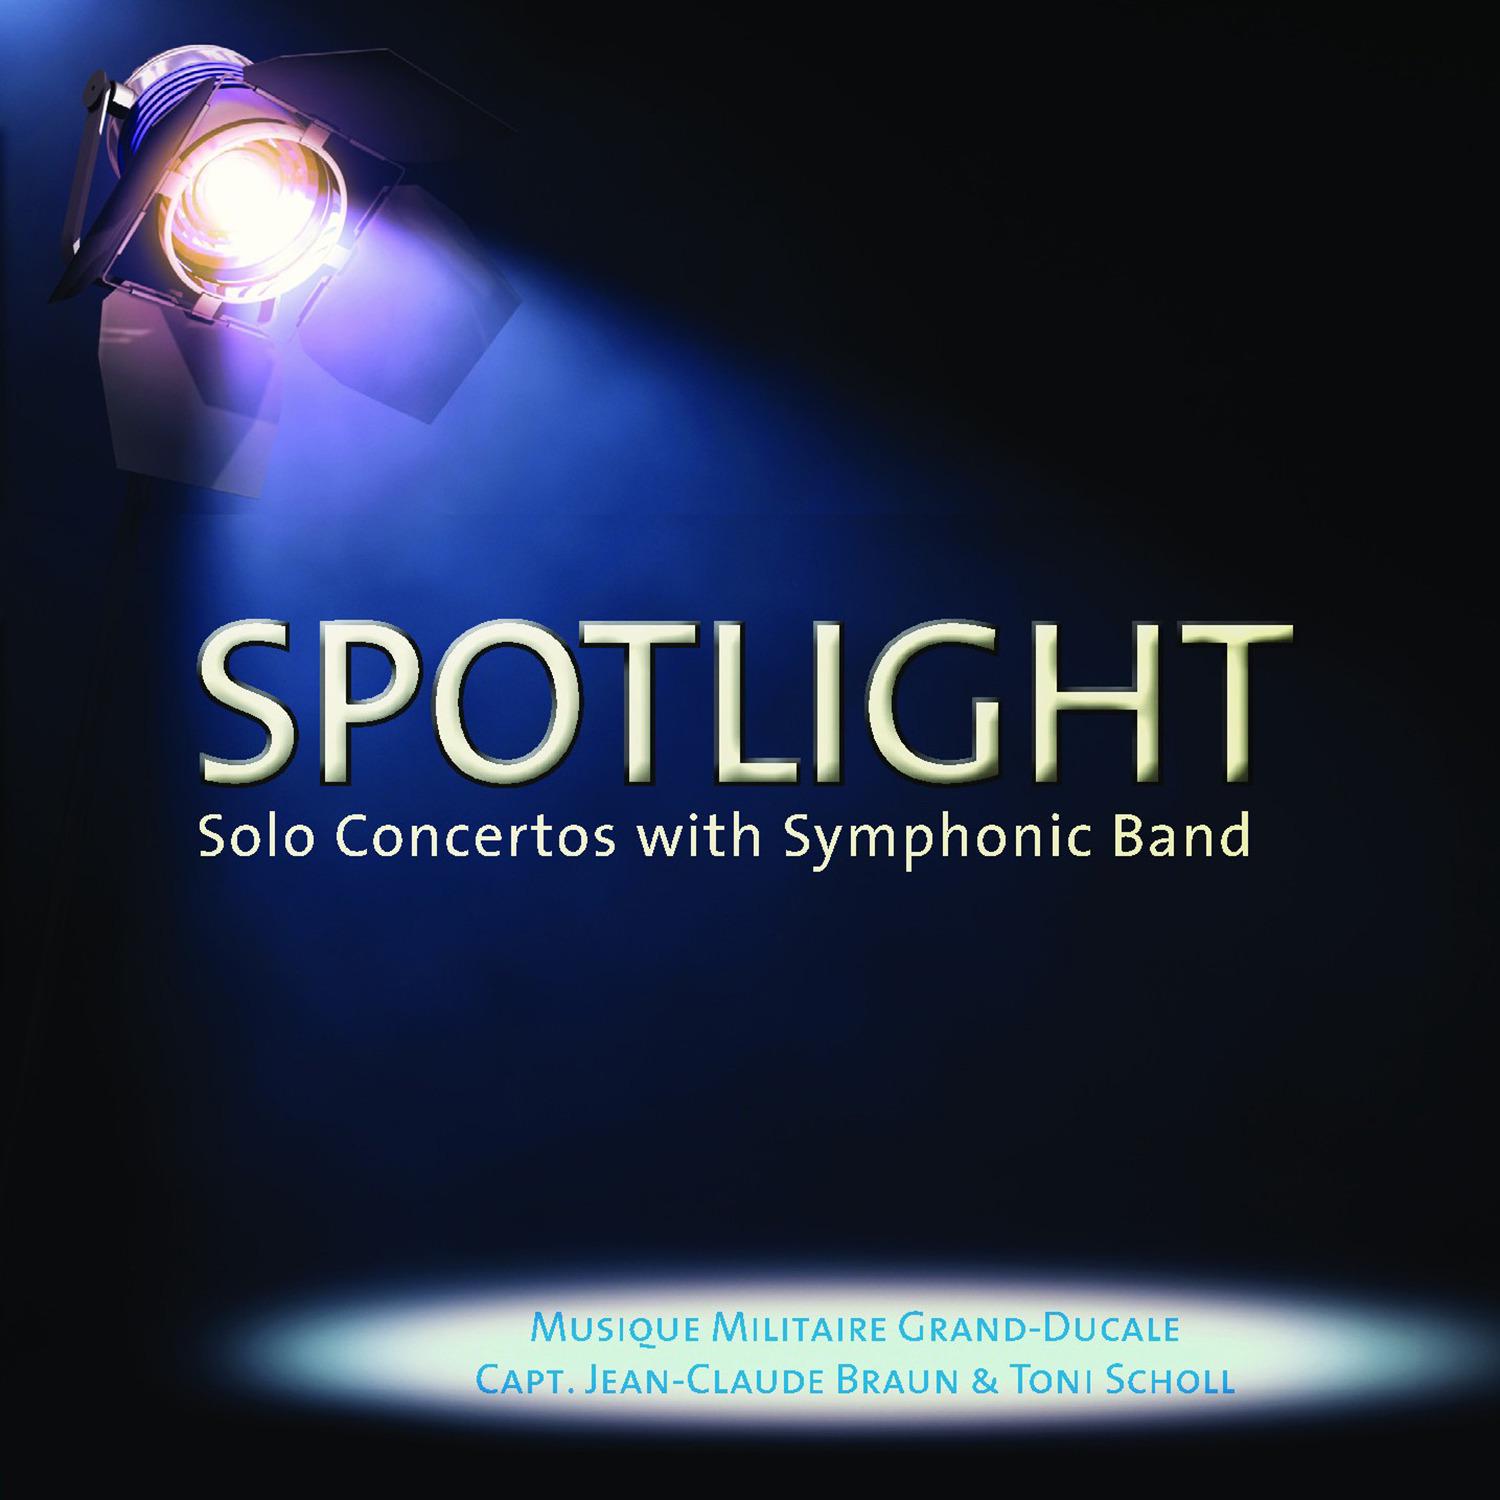 Spotlight - Solo Concertos with Symphonic Band